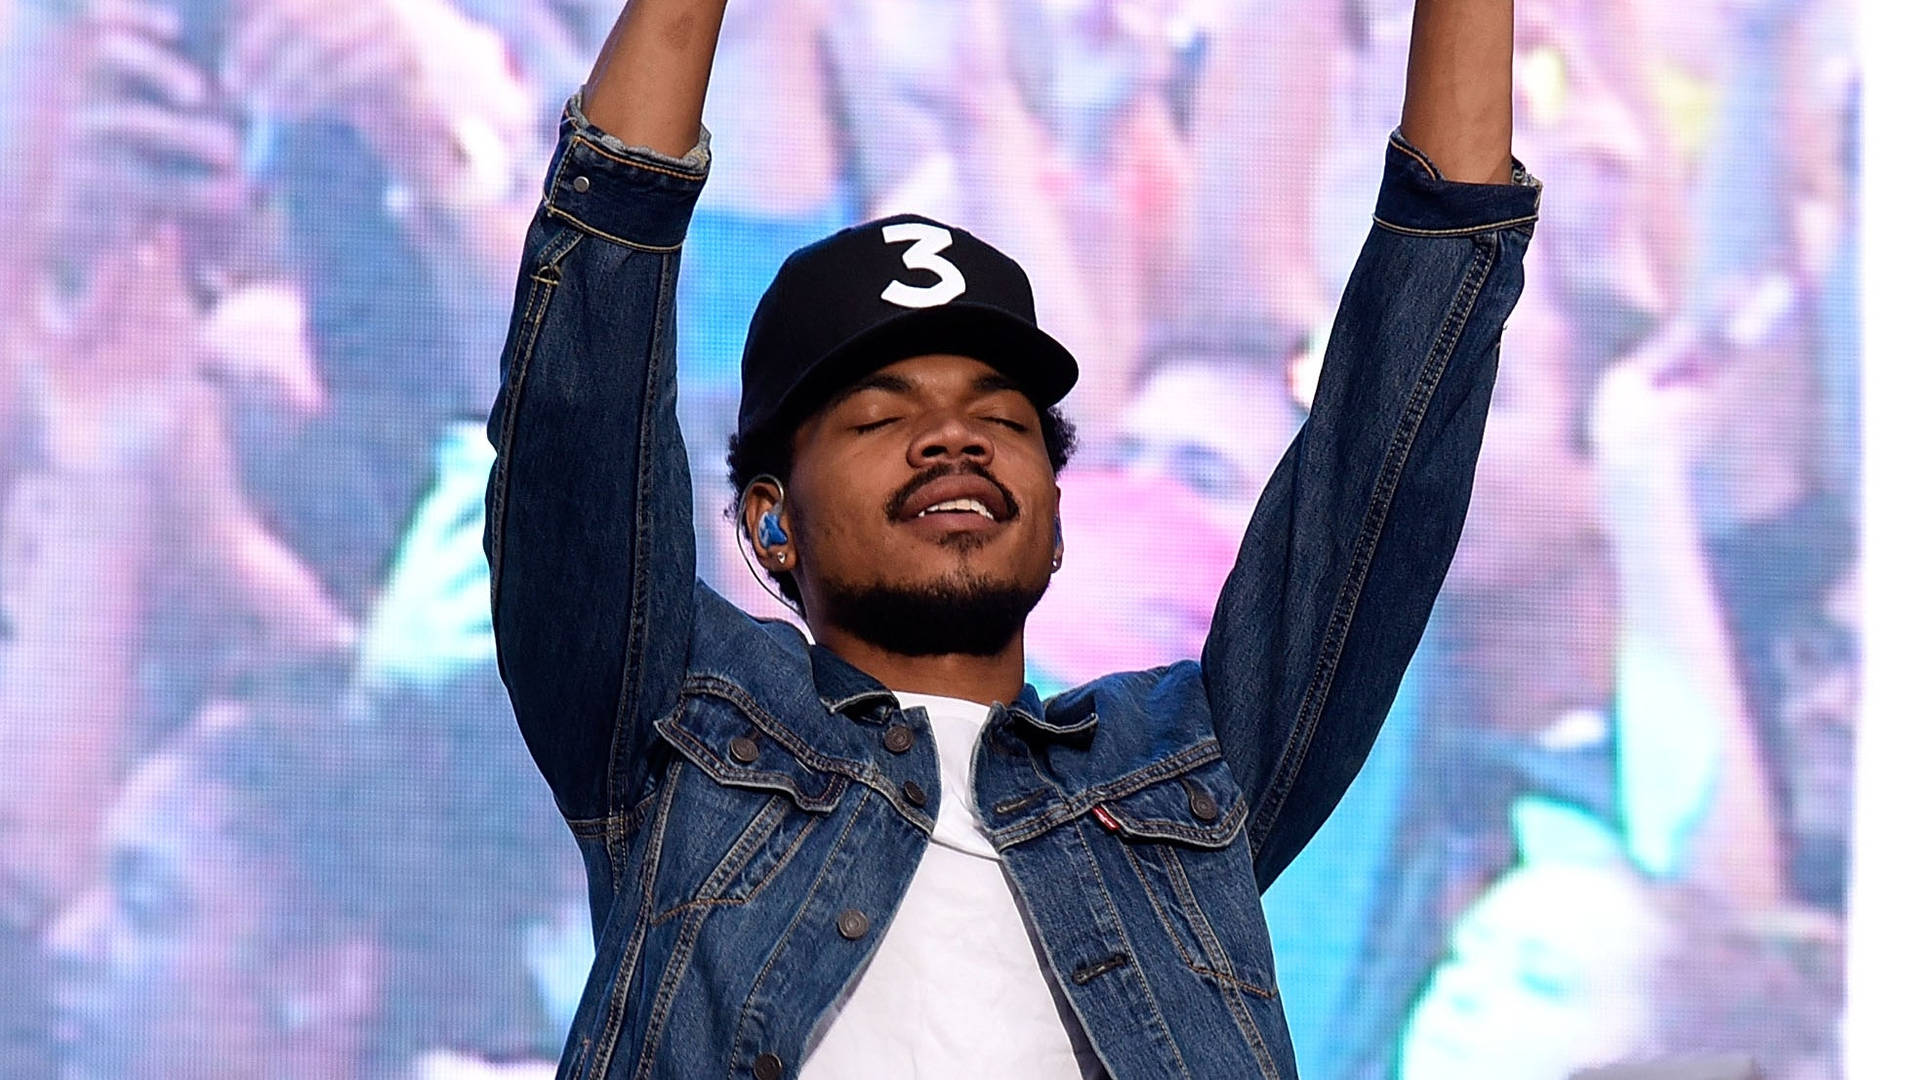 Chance The Rapper Wallpapers  Top 23 Best Chance The Rapper Wallpapers   HQ 